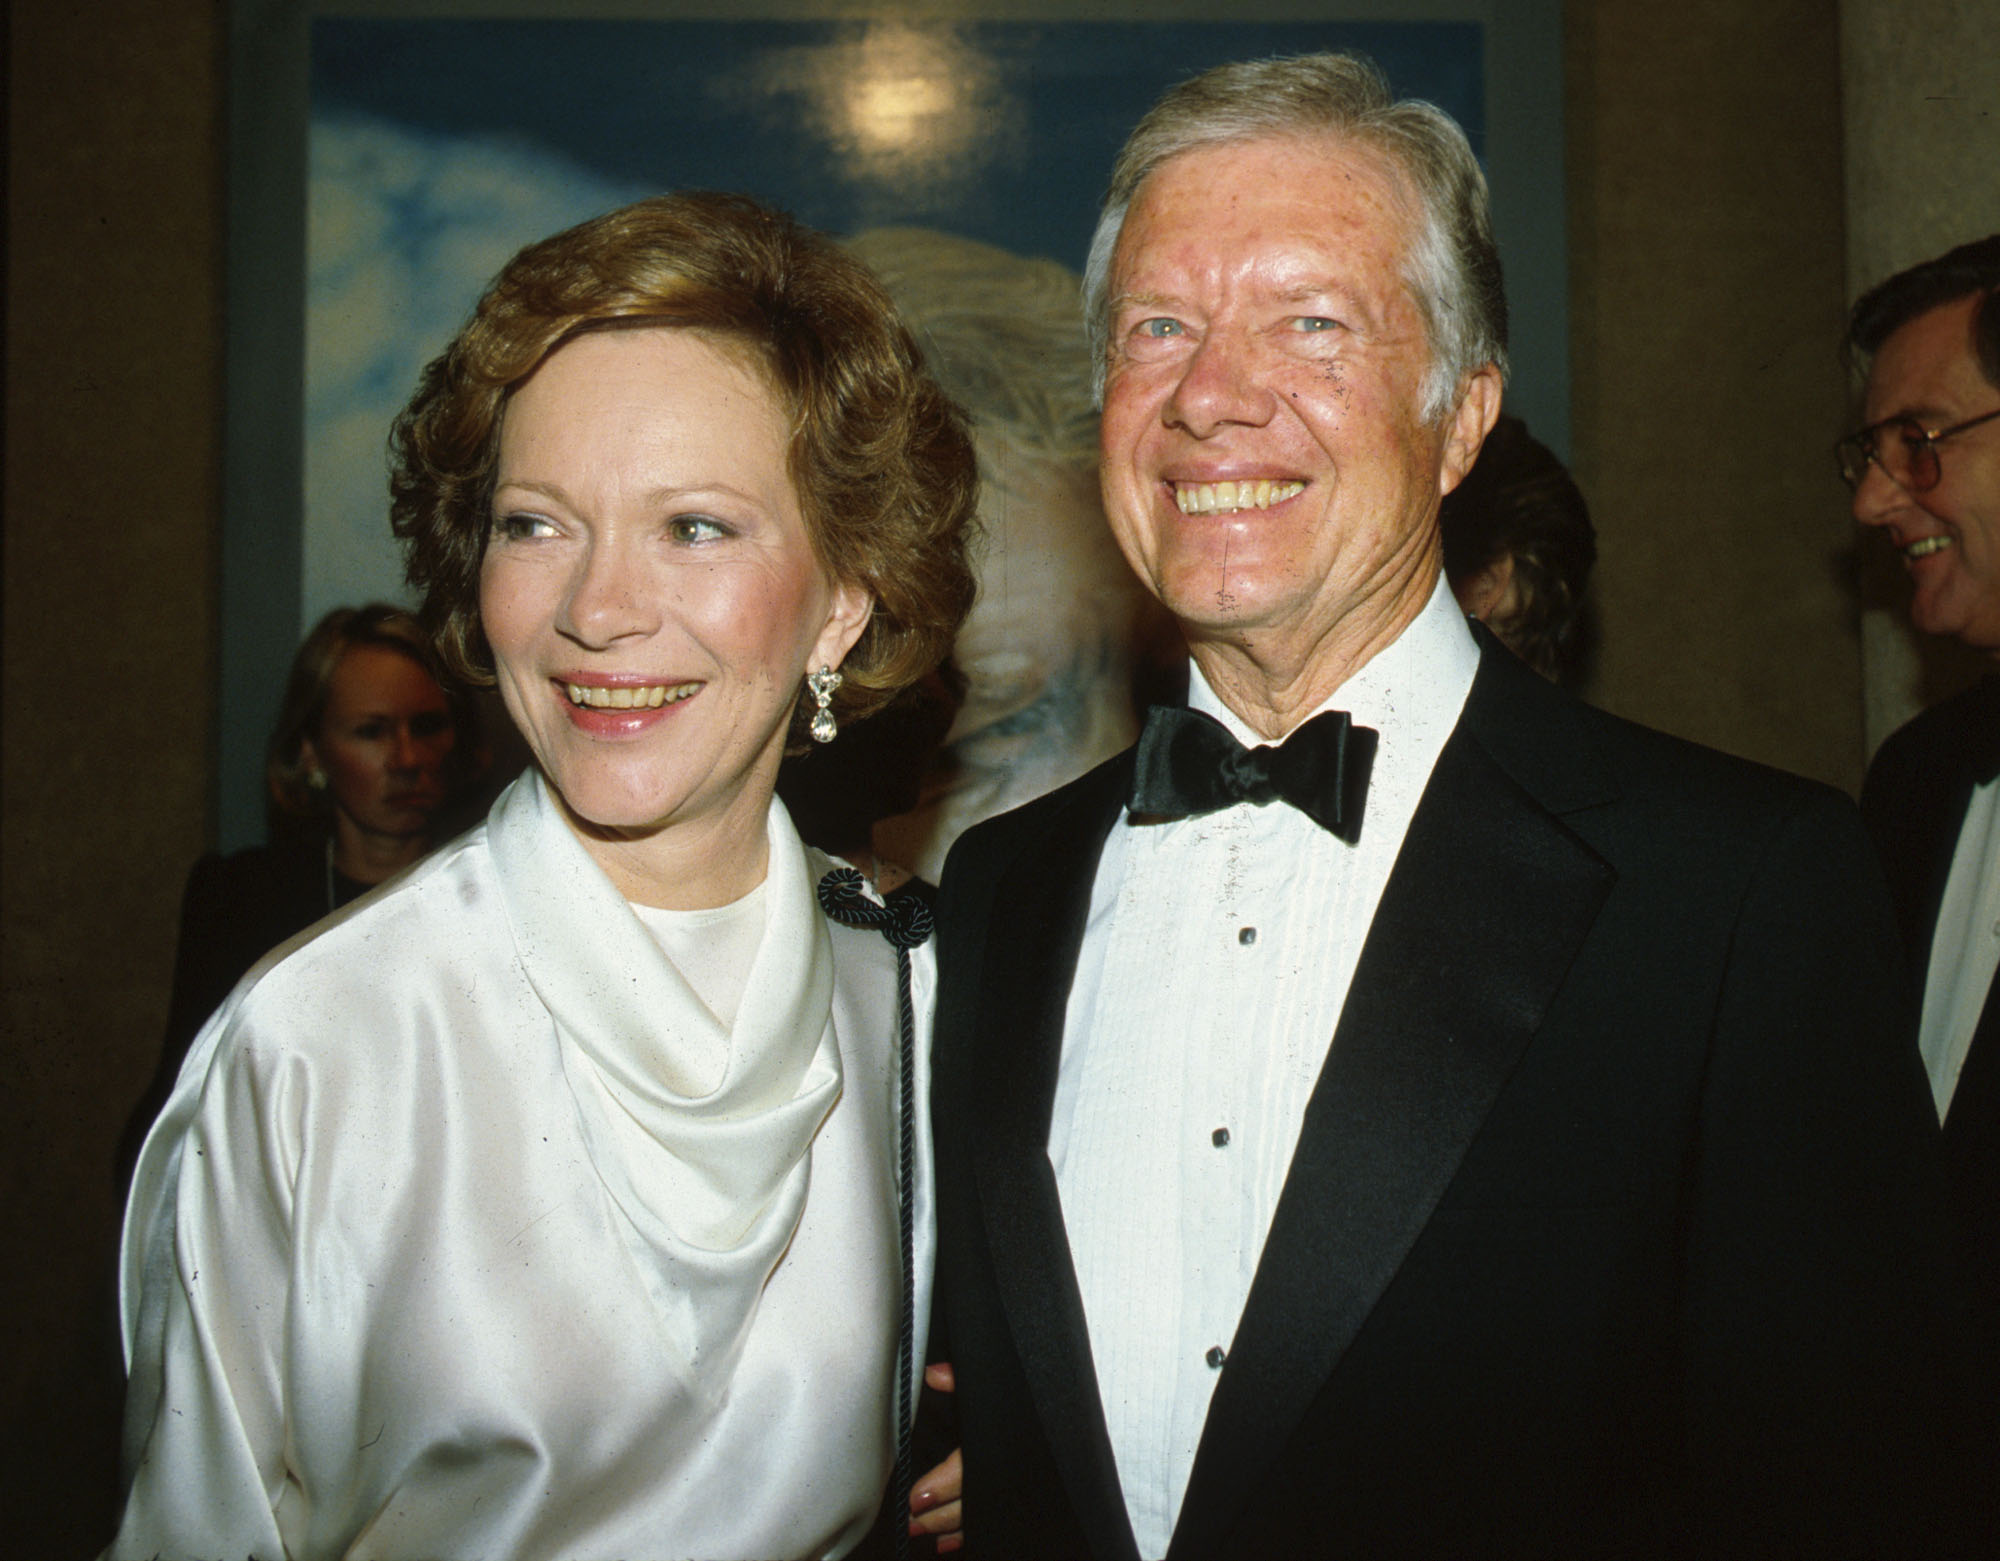 The Remarkable Love Story of Rosalynn and Jimmy Carter